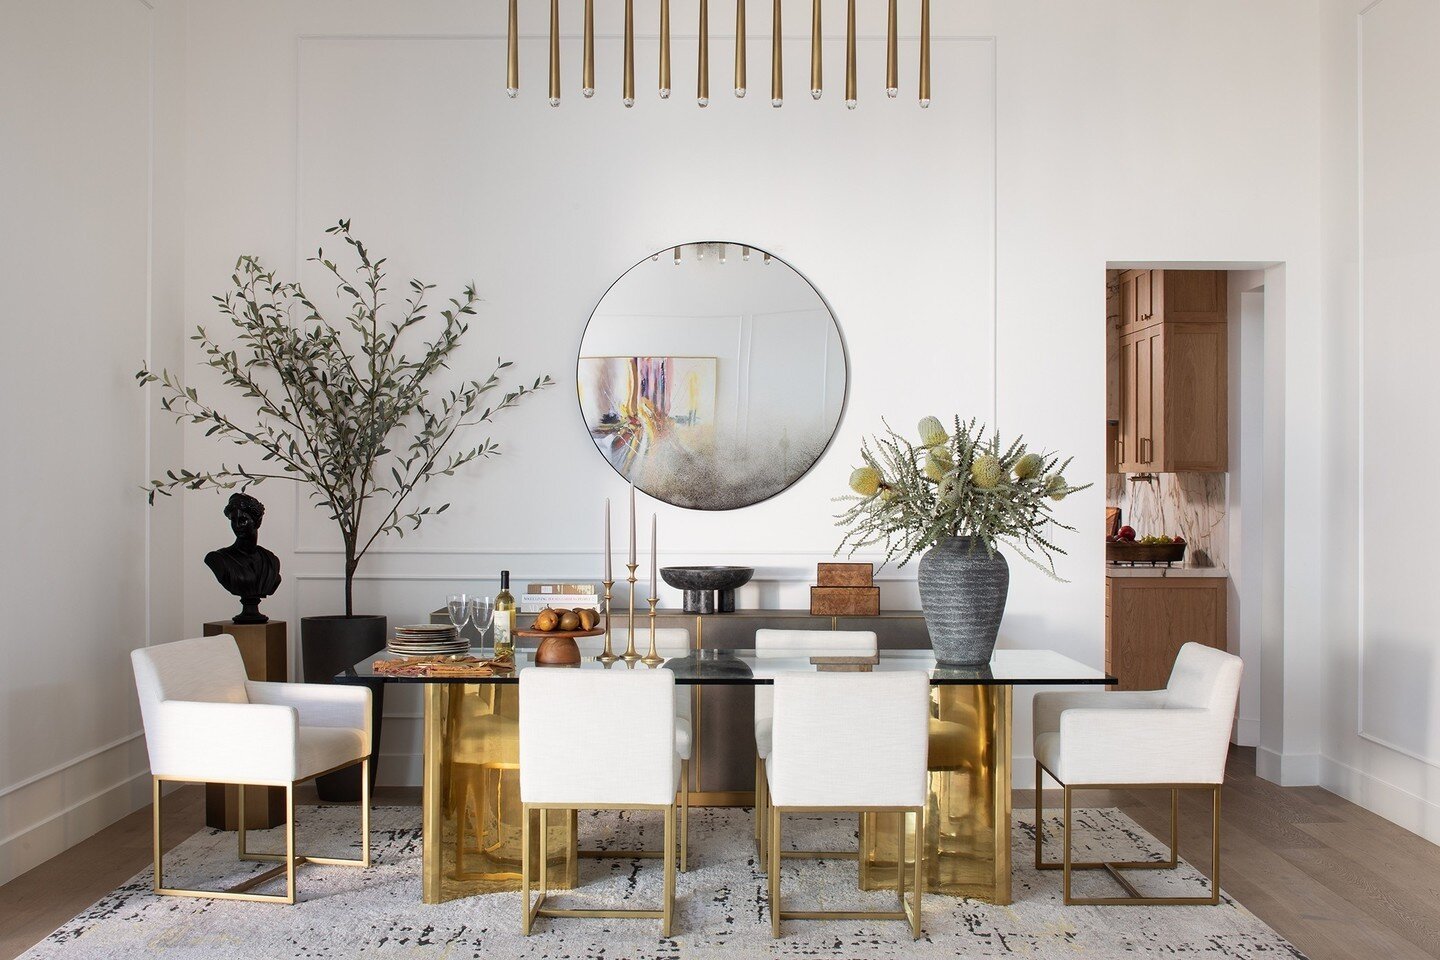 I'm excited to share a home that has been a long time in the making! We had a great time designing this modern dining room for an incredible family. We selected furniture with sleek, clean lines and brought in different materials like brass, glass, a